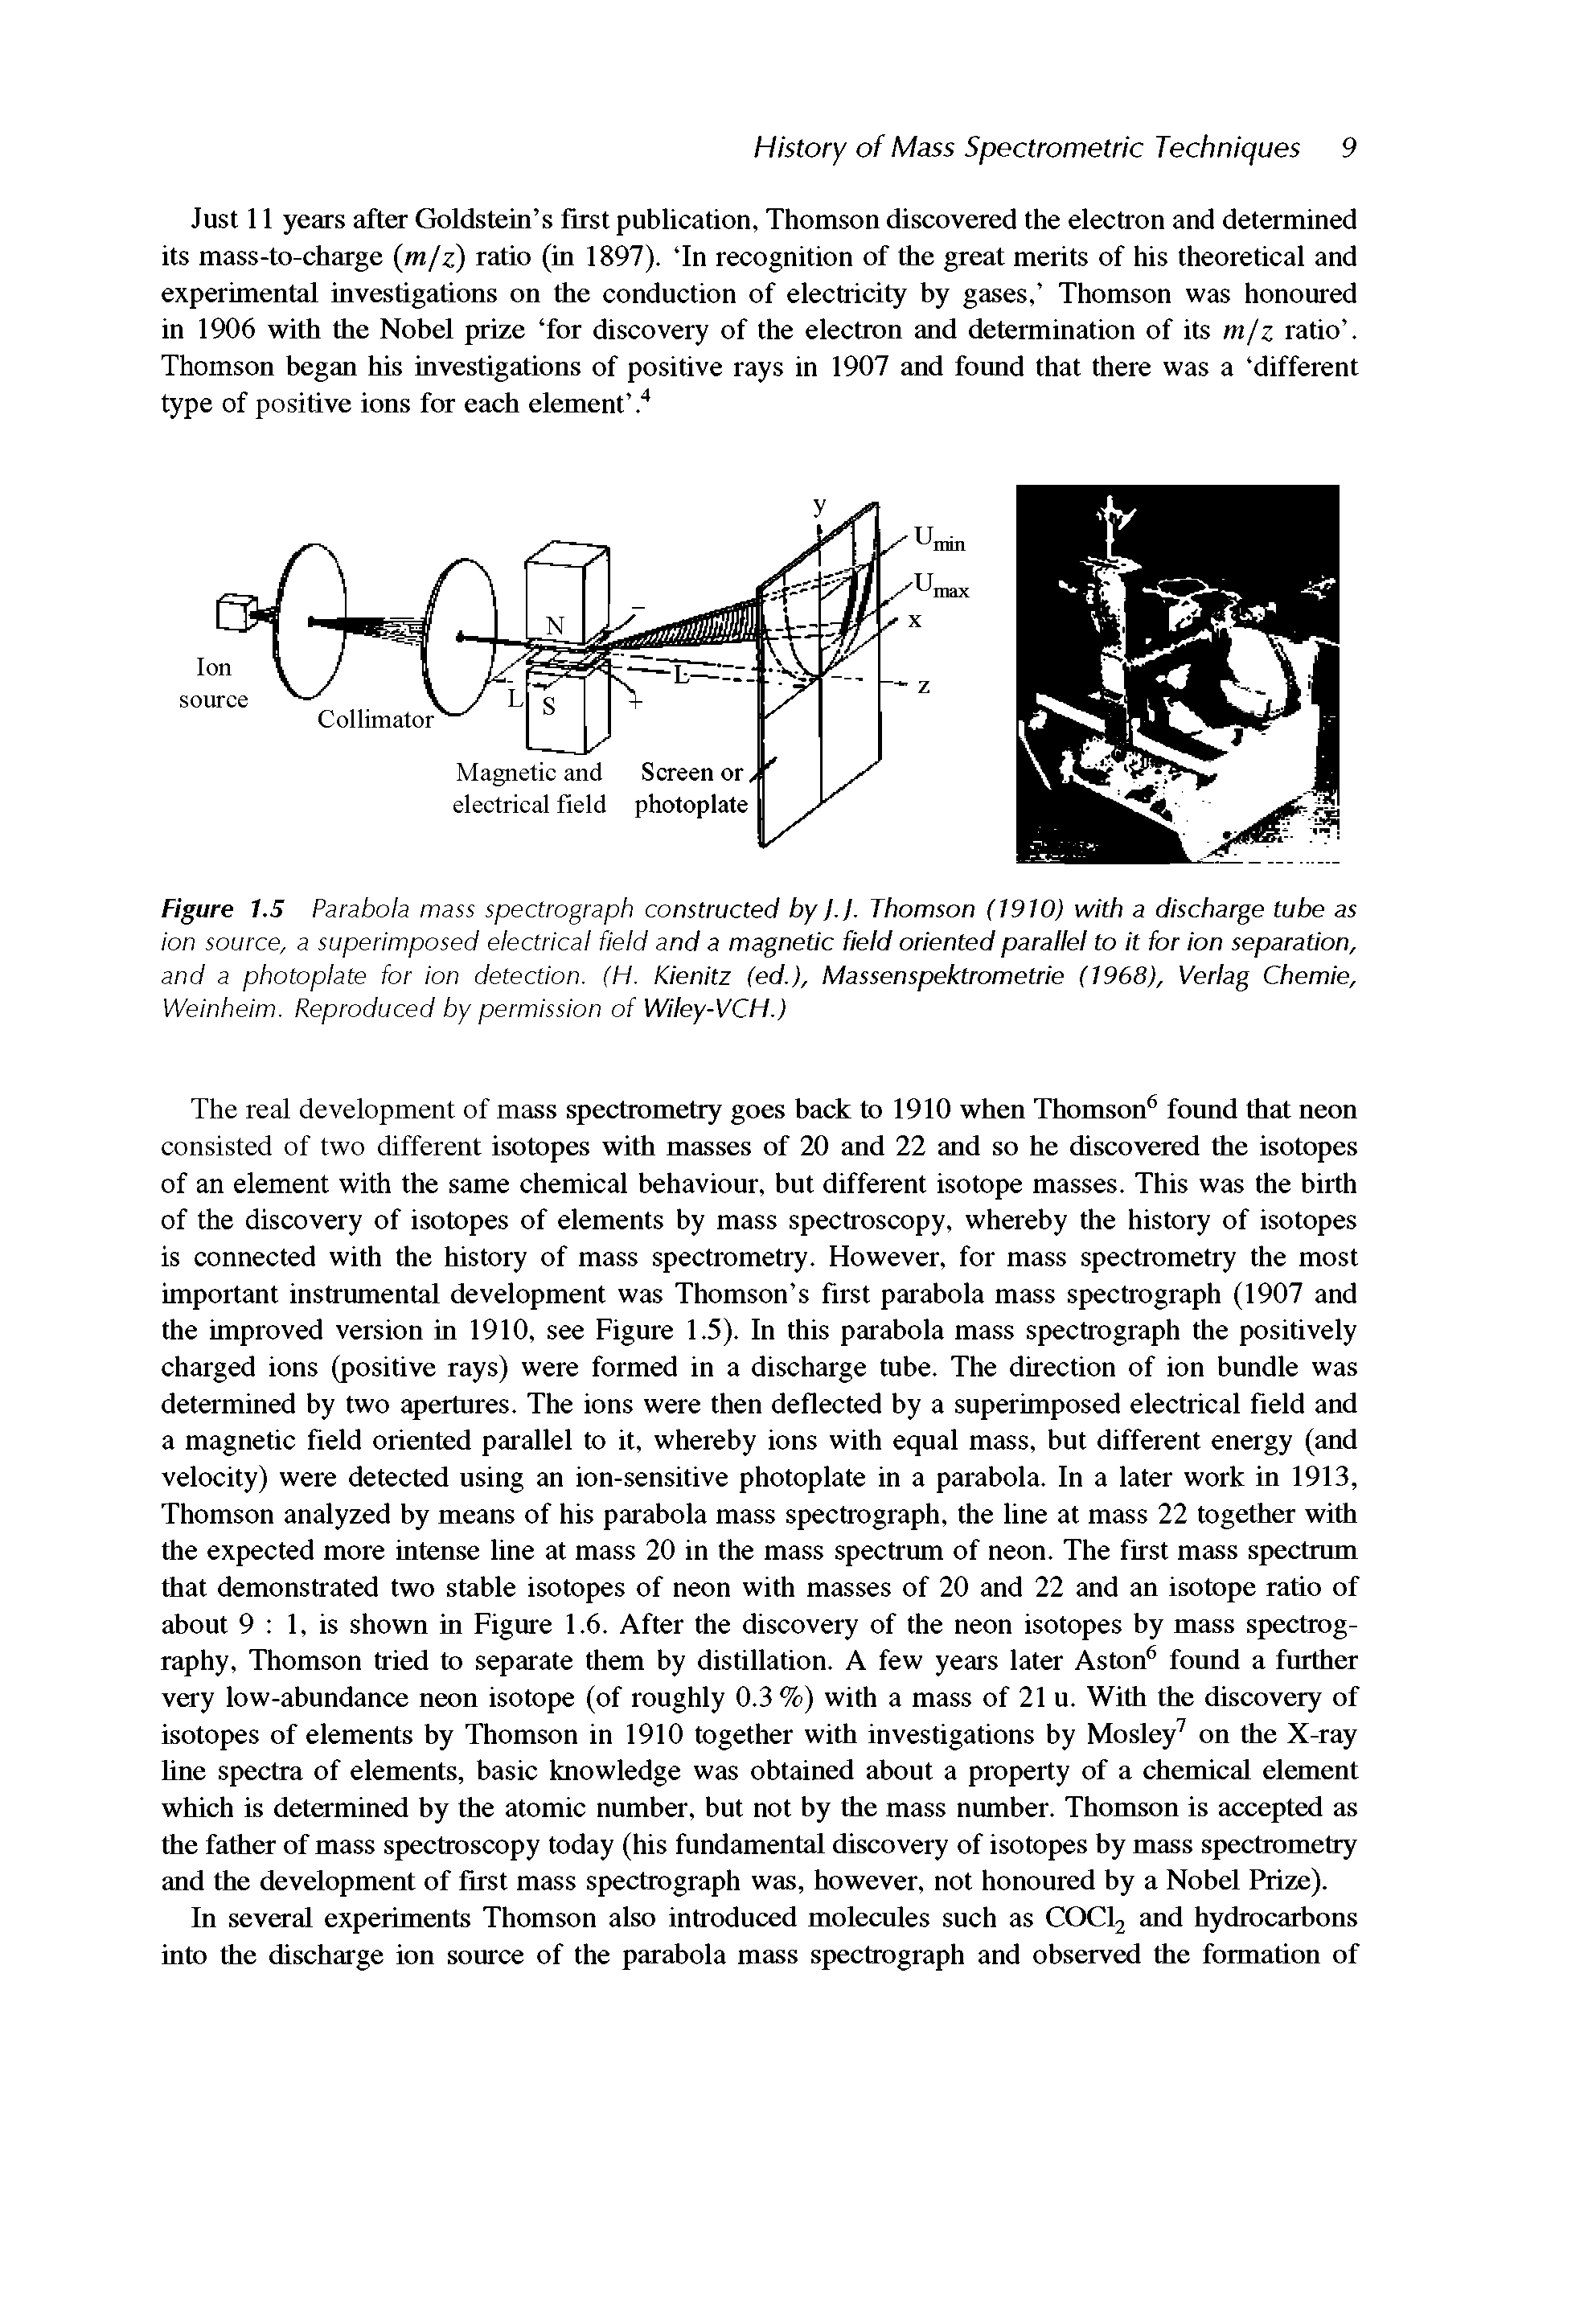 Figure 1.5 Parabola mass spectrograph constructed bylJ. Thomson (1910) with a discharge tube as ion source, a superimposed electrical field and a magnetic field oriented parallel to it for ion separation, and a photoplate for ion detection. (H. Kienitz (ed.), Massenspektrometrie (1968), Verlag Chemie, Weinheim. Reproduced by permission of Wiley-VCH.)...